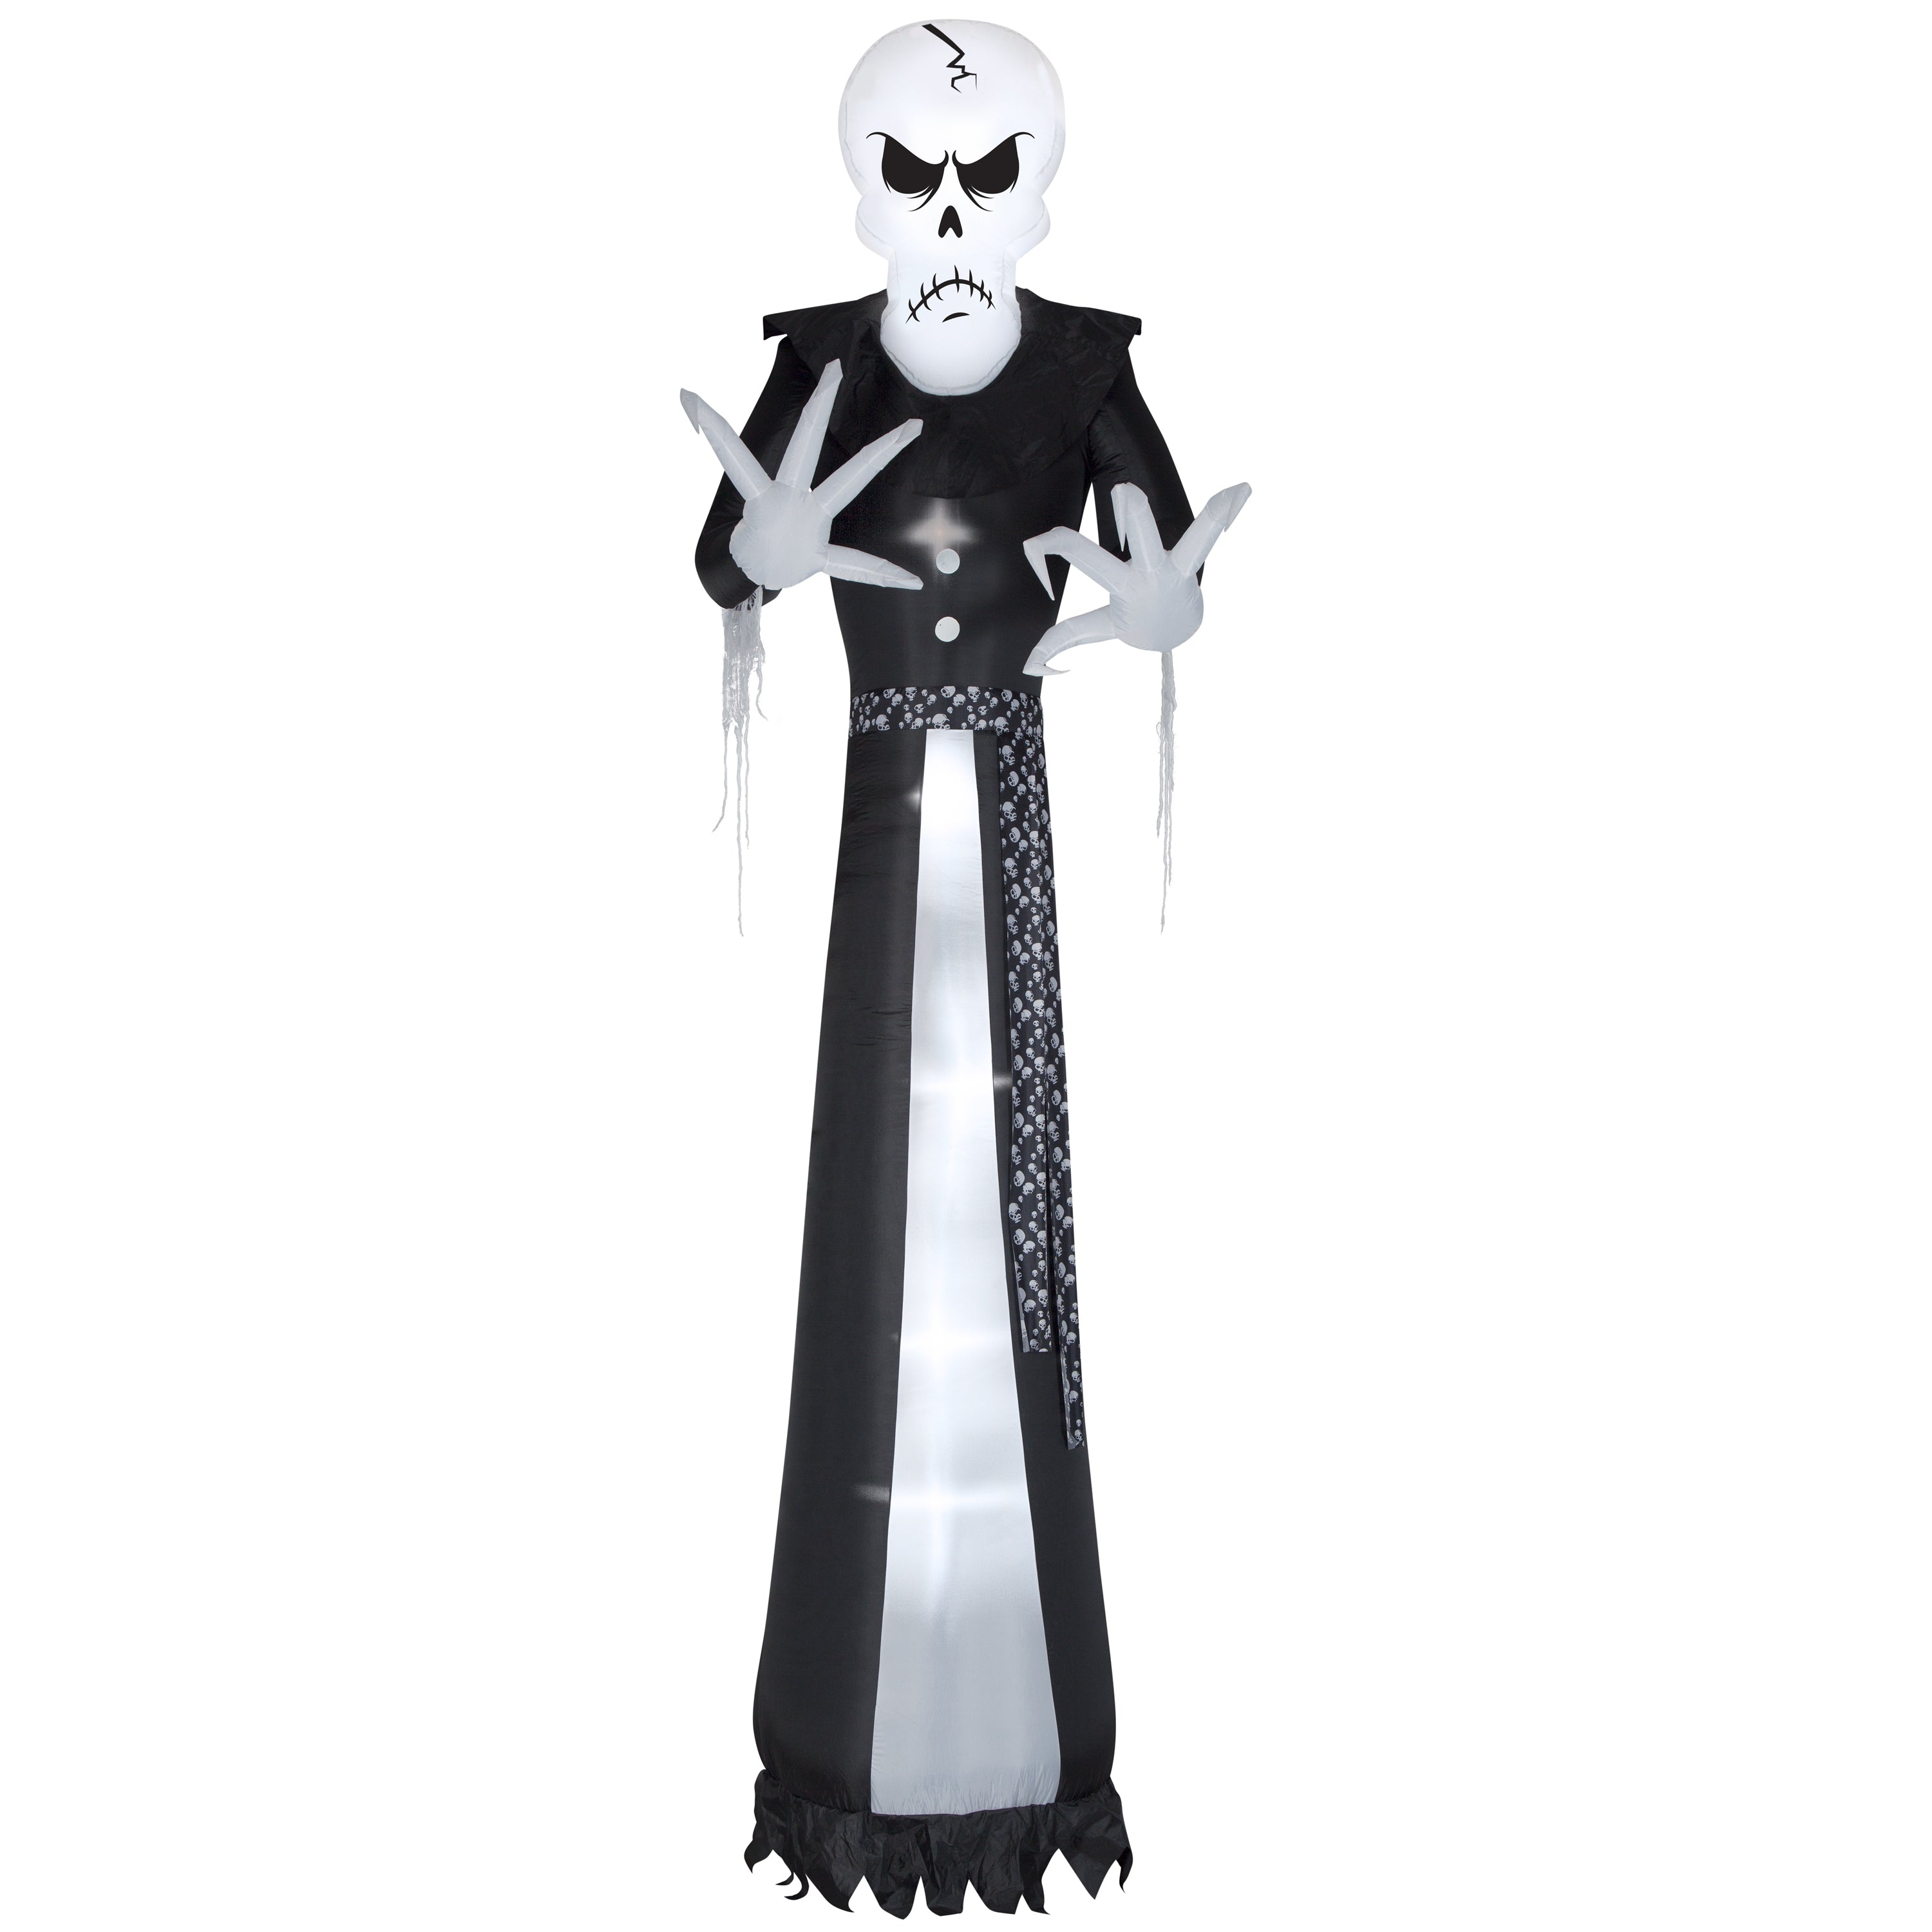 Gemmy Giant Airblown Inflatable Dapper Skull Ghoul, 12 ft Tall, White